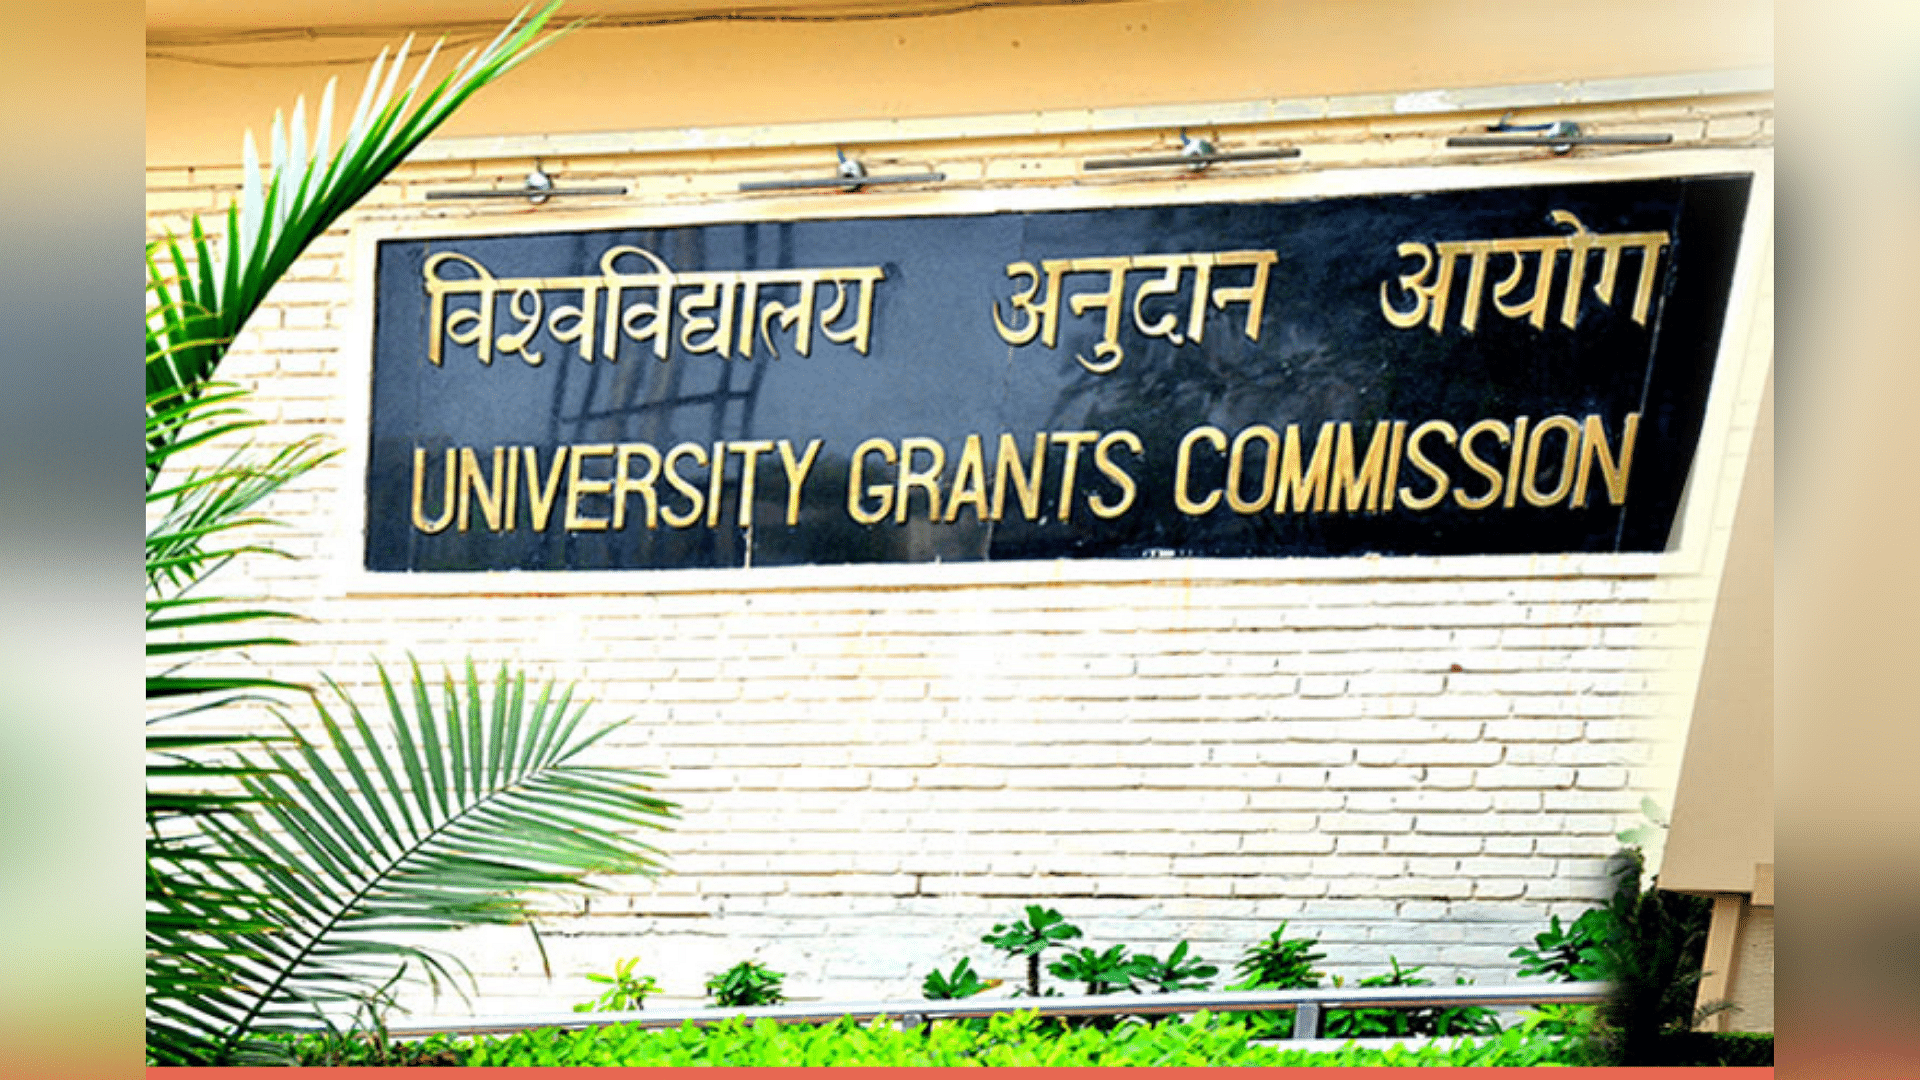 UGC released a list of 24 fake universities currently operating in India.